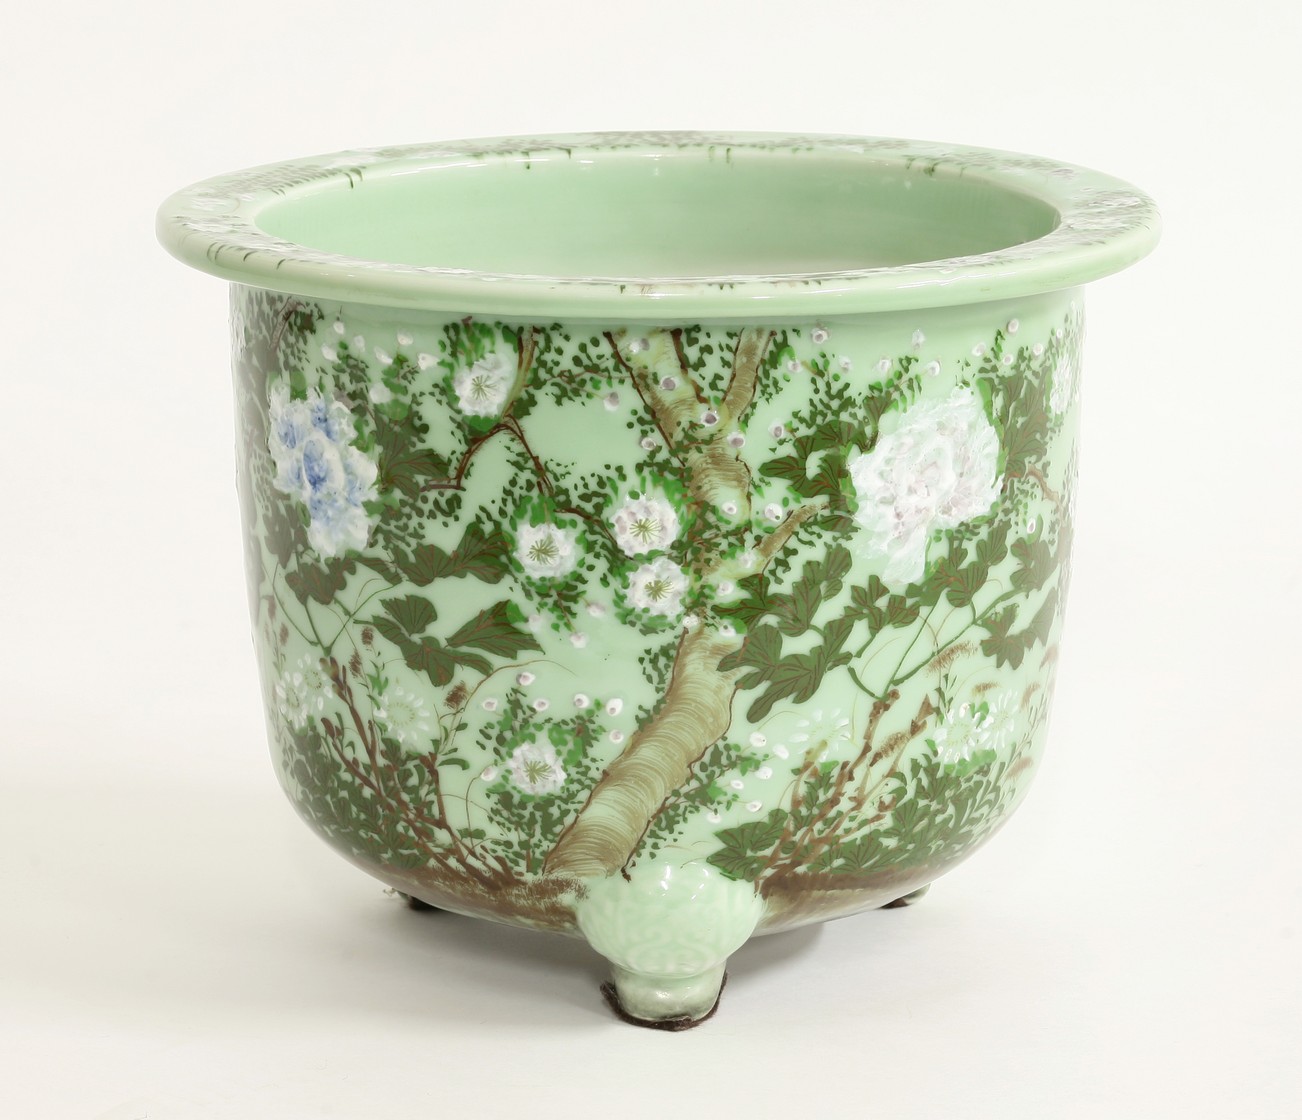 A large pea-green Seto Jardinière,
c.1900, the cylindrical sides and flared rim with various